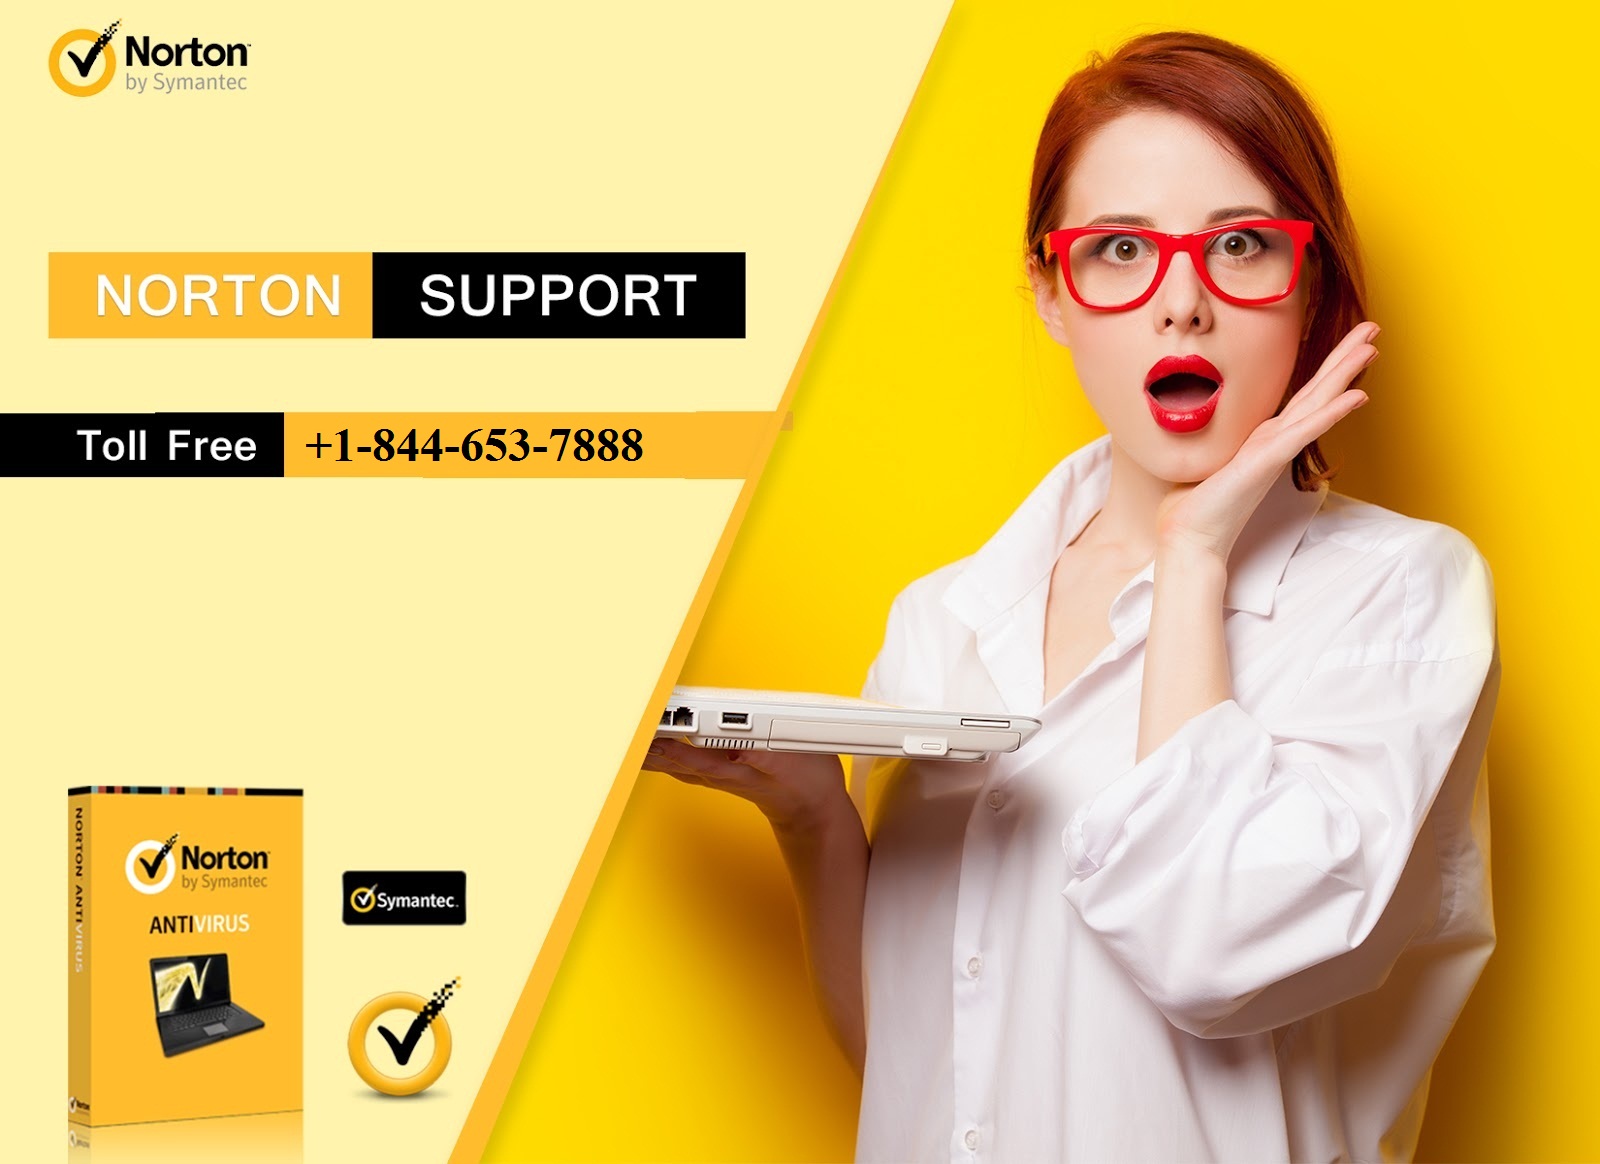 Norton Support Number +1844-653-7888